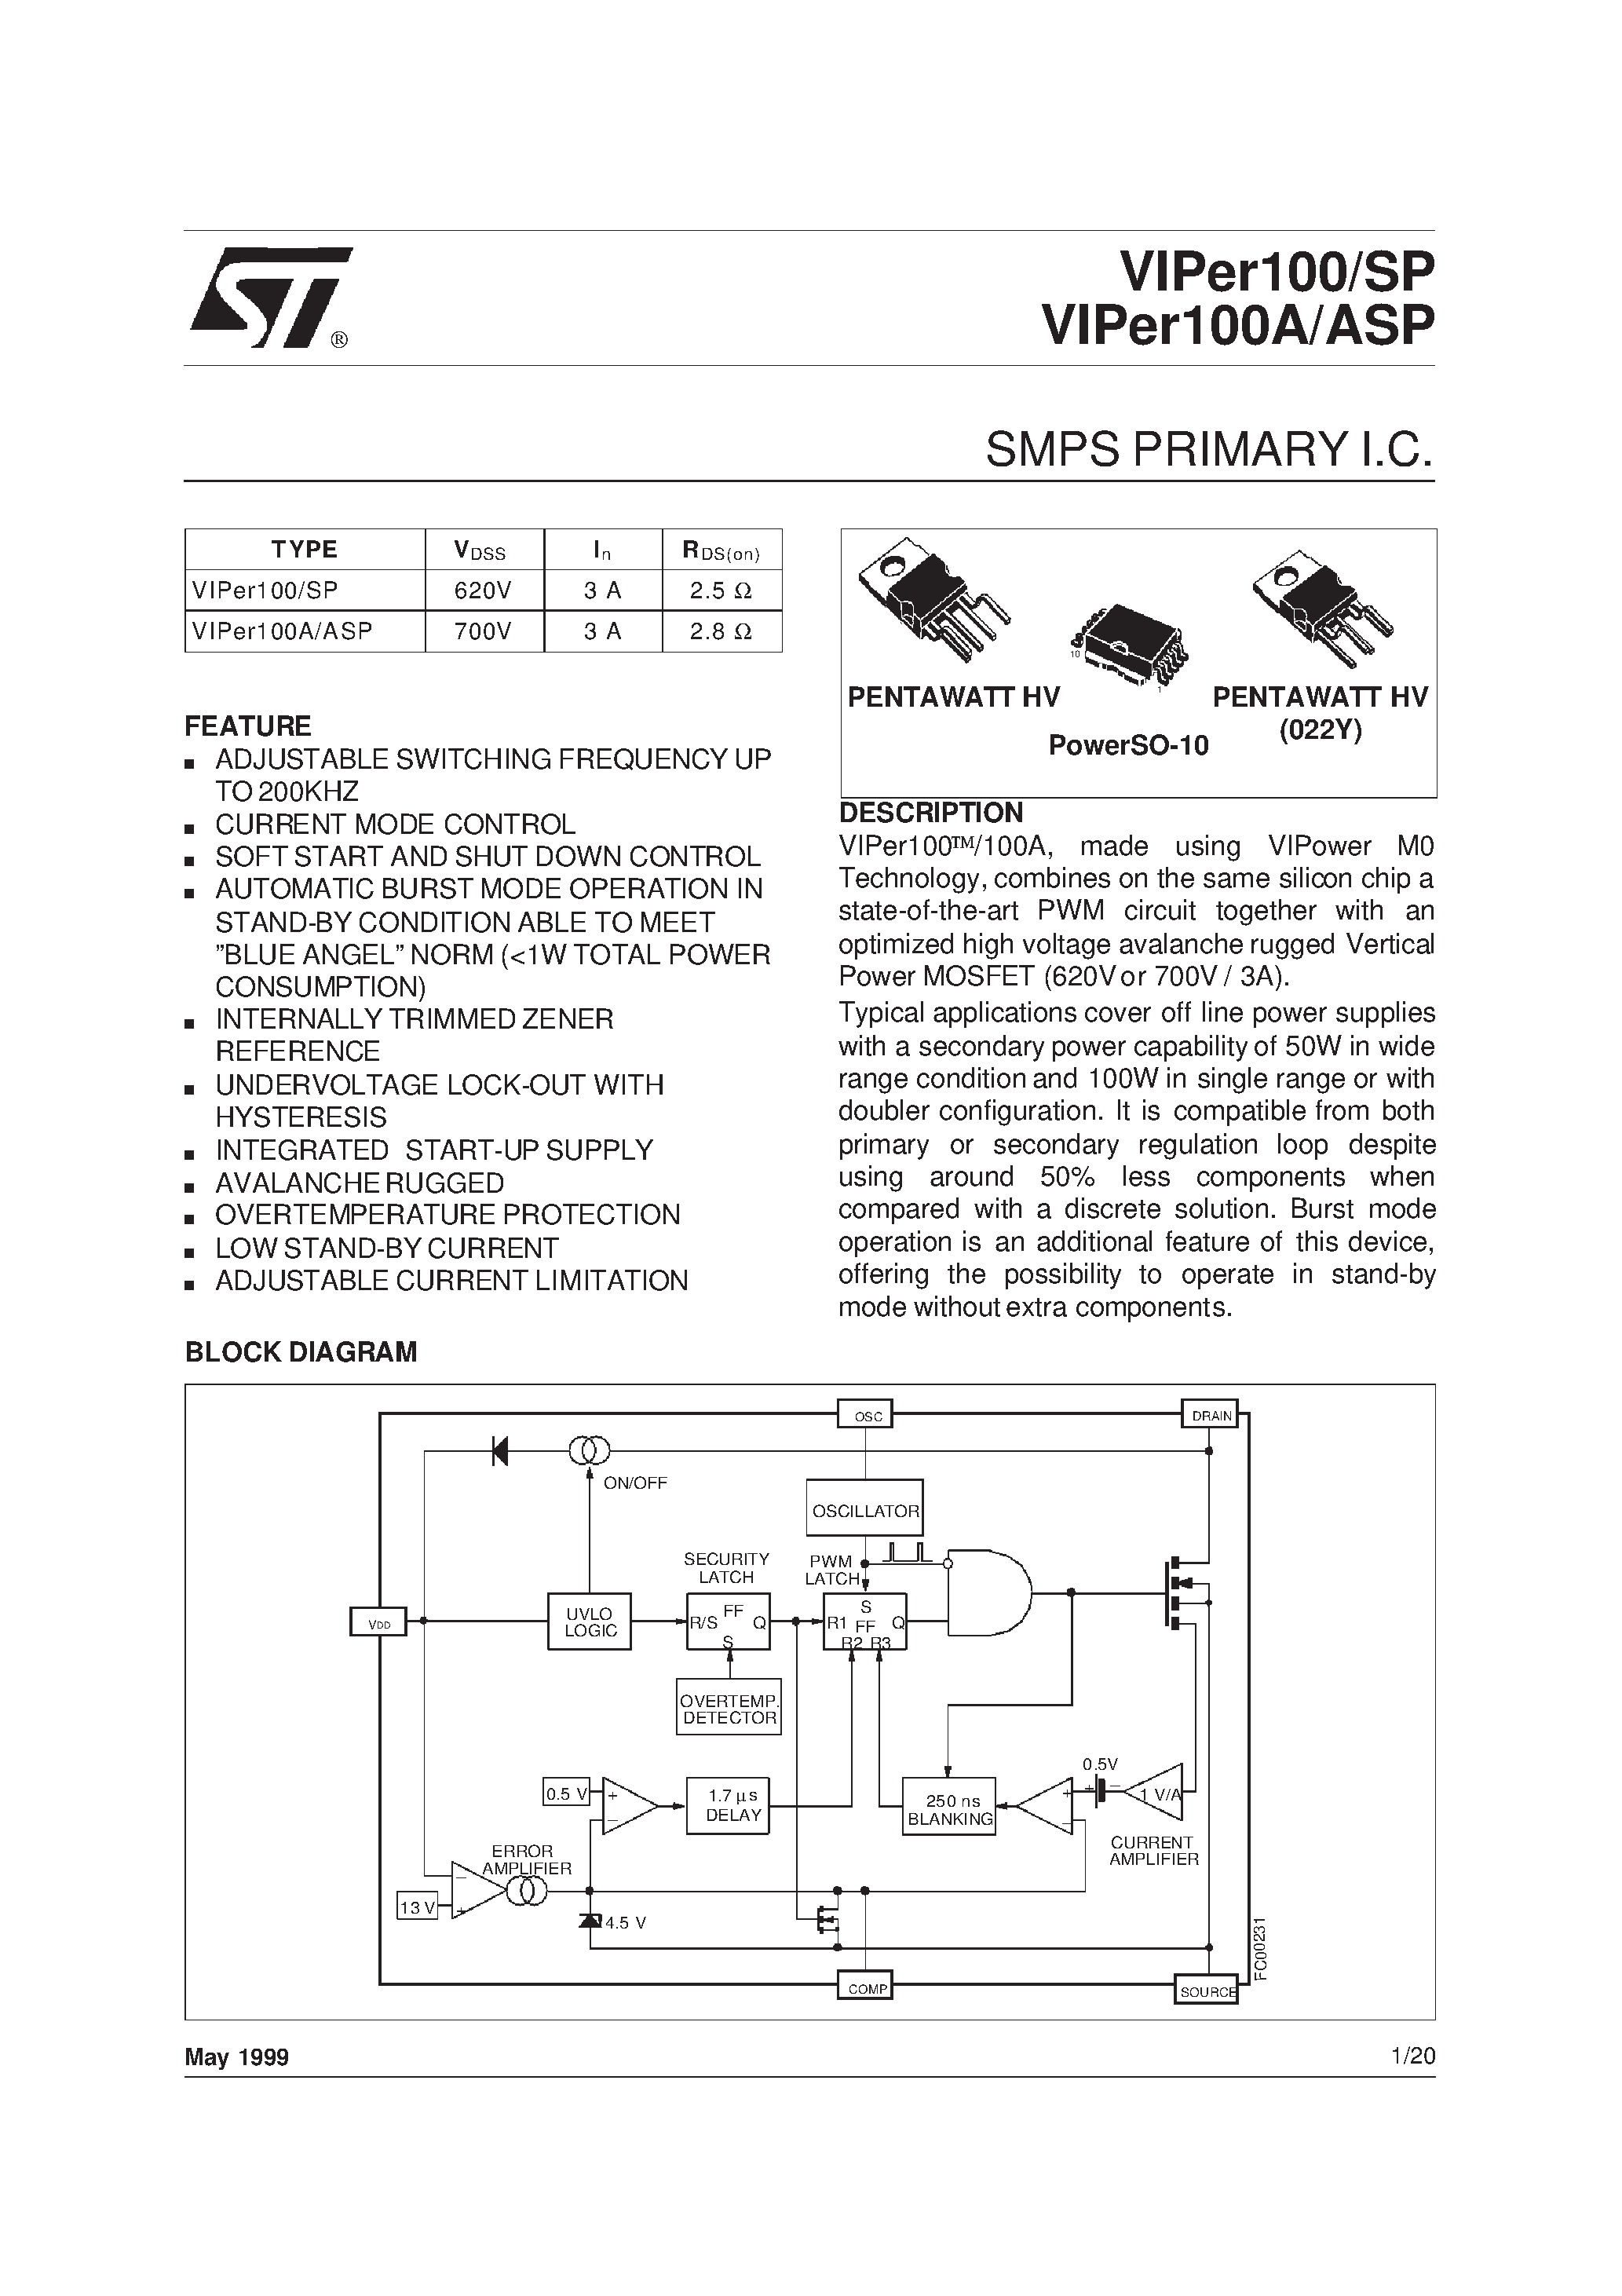 Datasheet VIPer100ASP - SMPS PRIMARY I.C. page 1